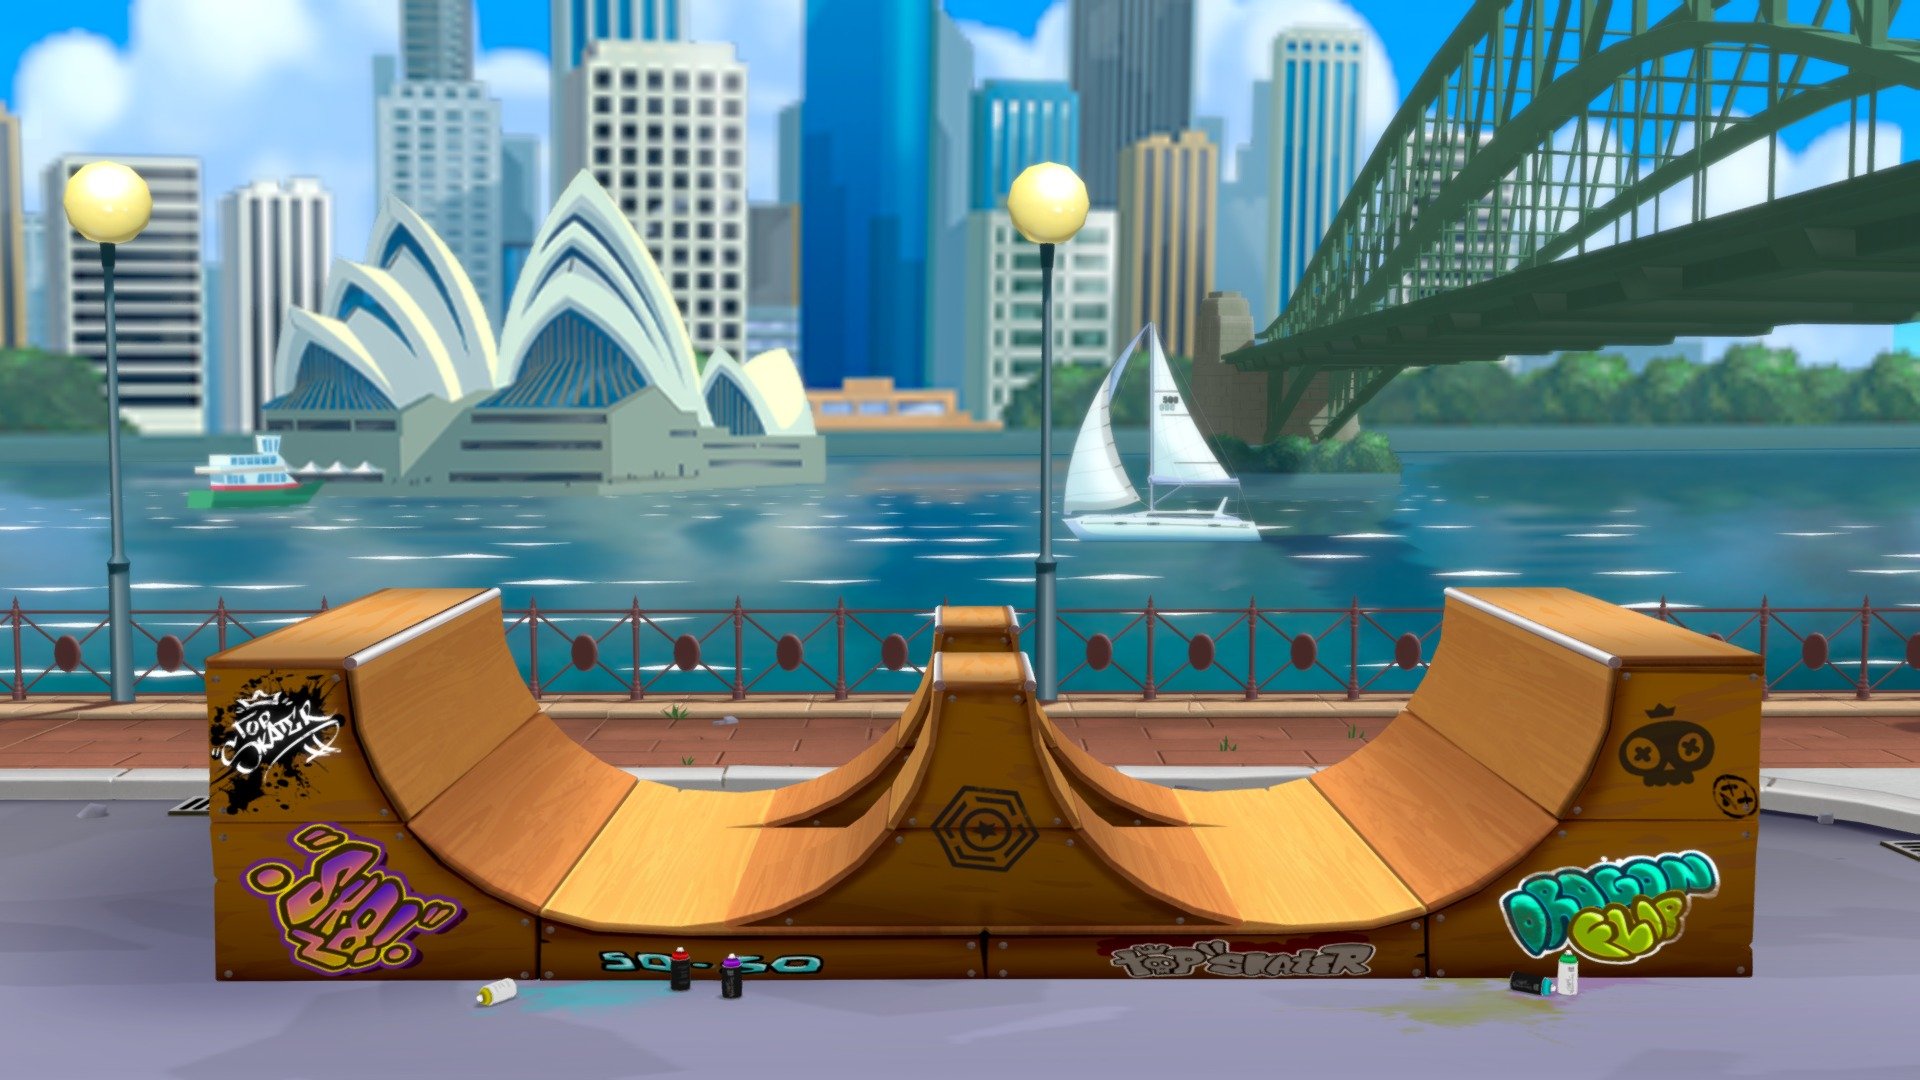 Braground made for Miniclip's FlipSkater game.
3D models plus animations made in Blender, texture in Photoshop - Sydney Background - FlipSkater - 3D model by AndersonGTS 3d model